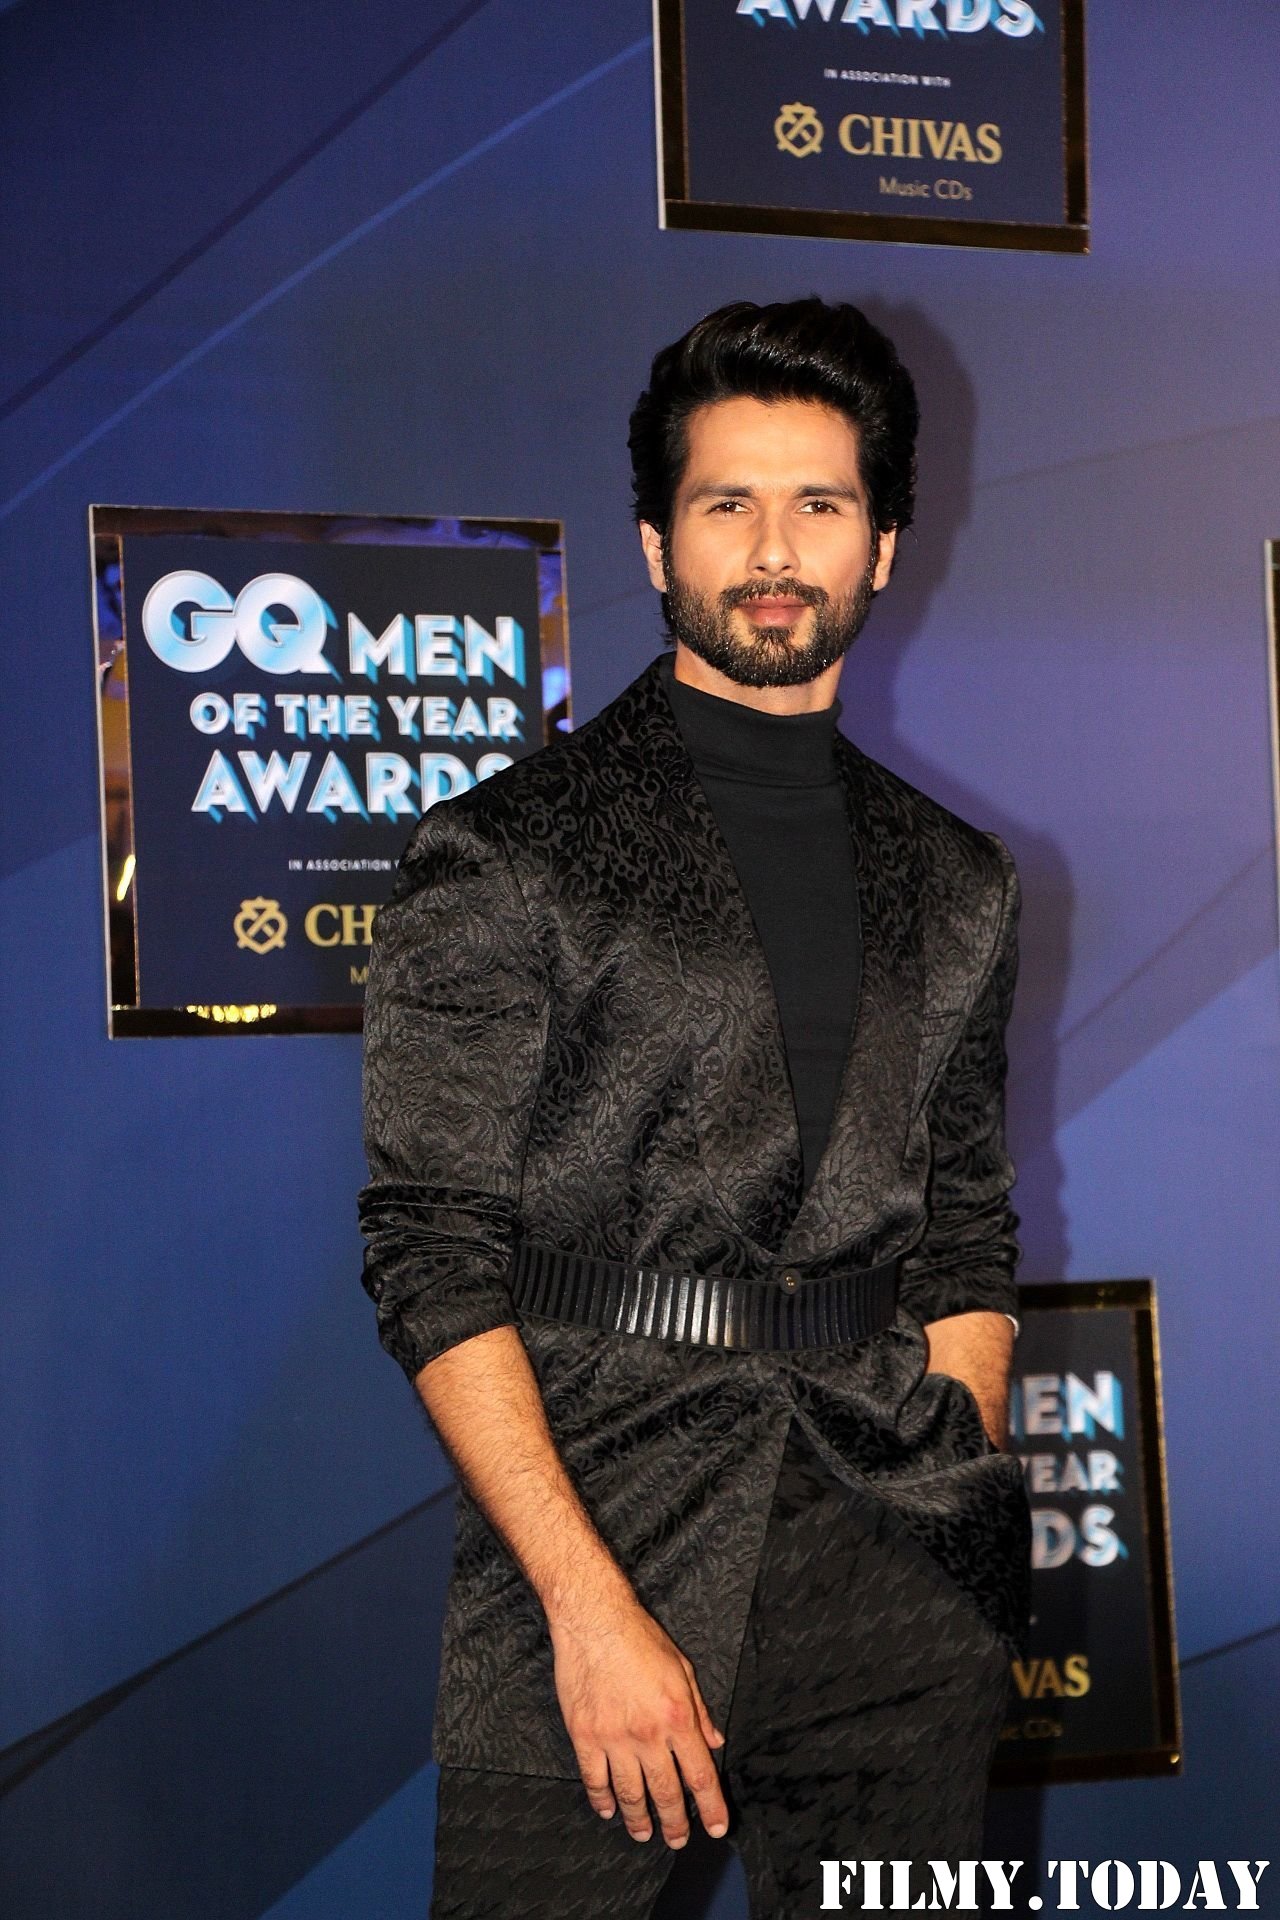 Shahid Kapoor - Photos: Celebs At GQ Men Of The Year Awards 2019 | Picture 1688040